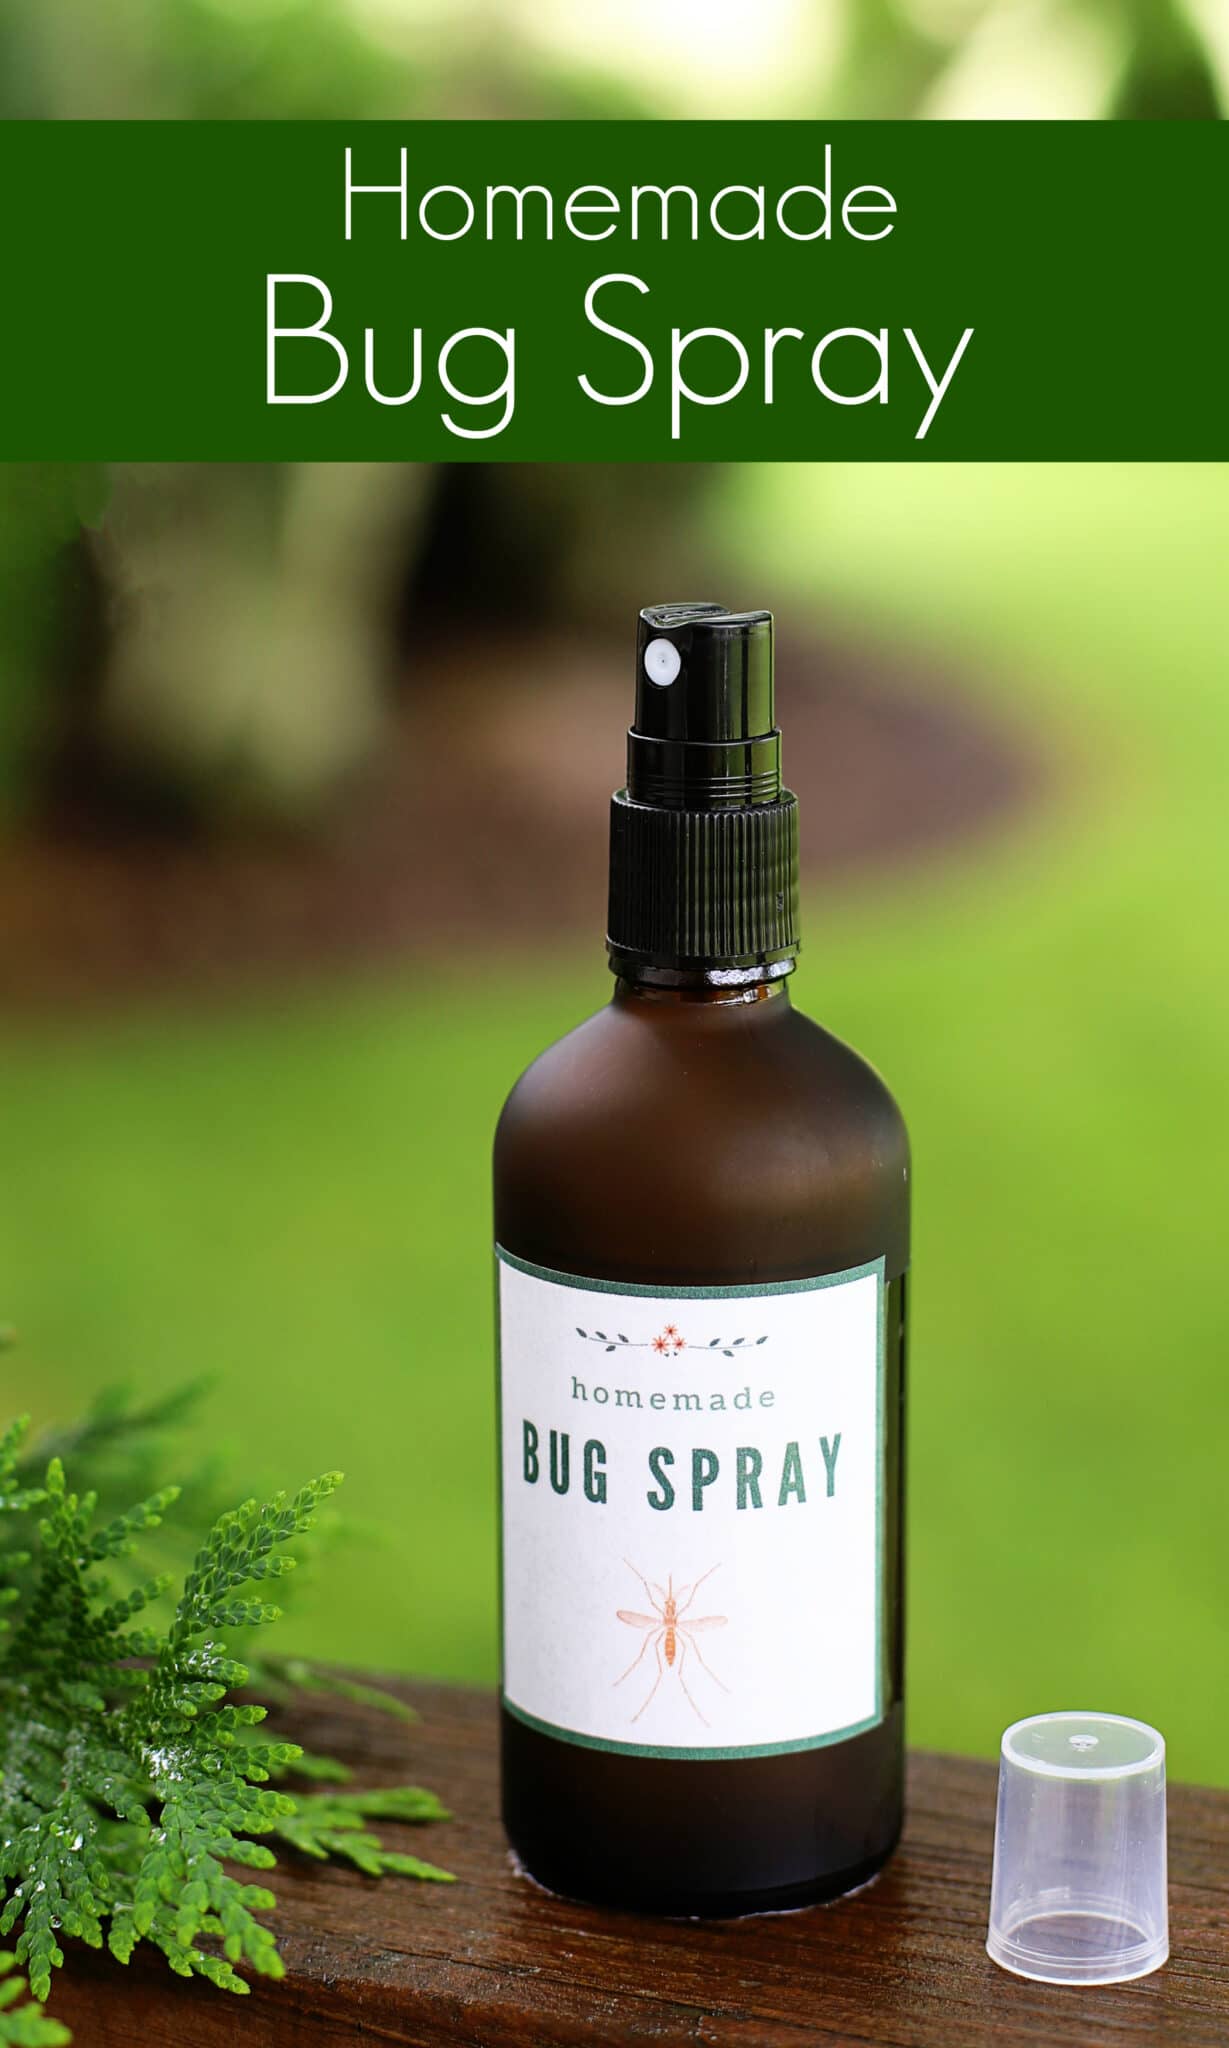 Homemade bug spray with natural ingredients